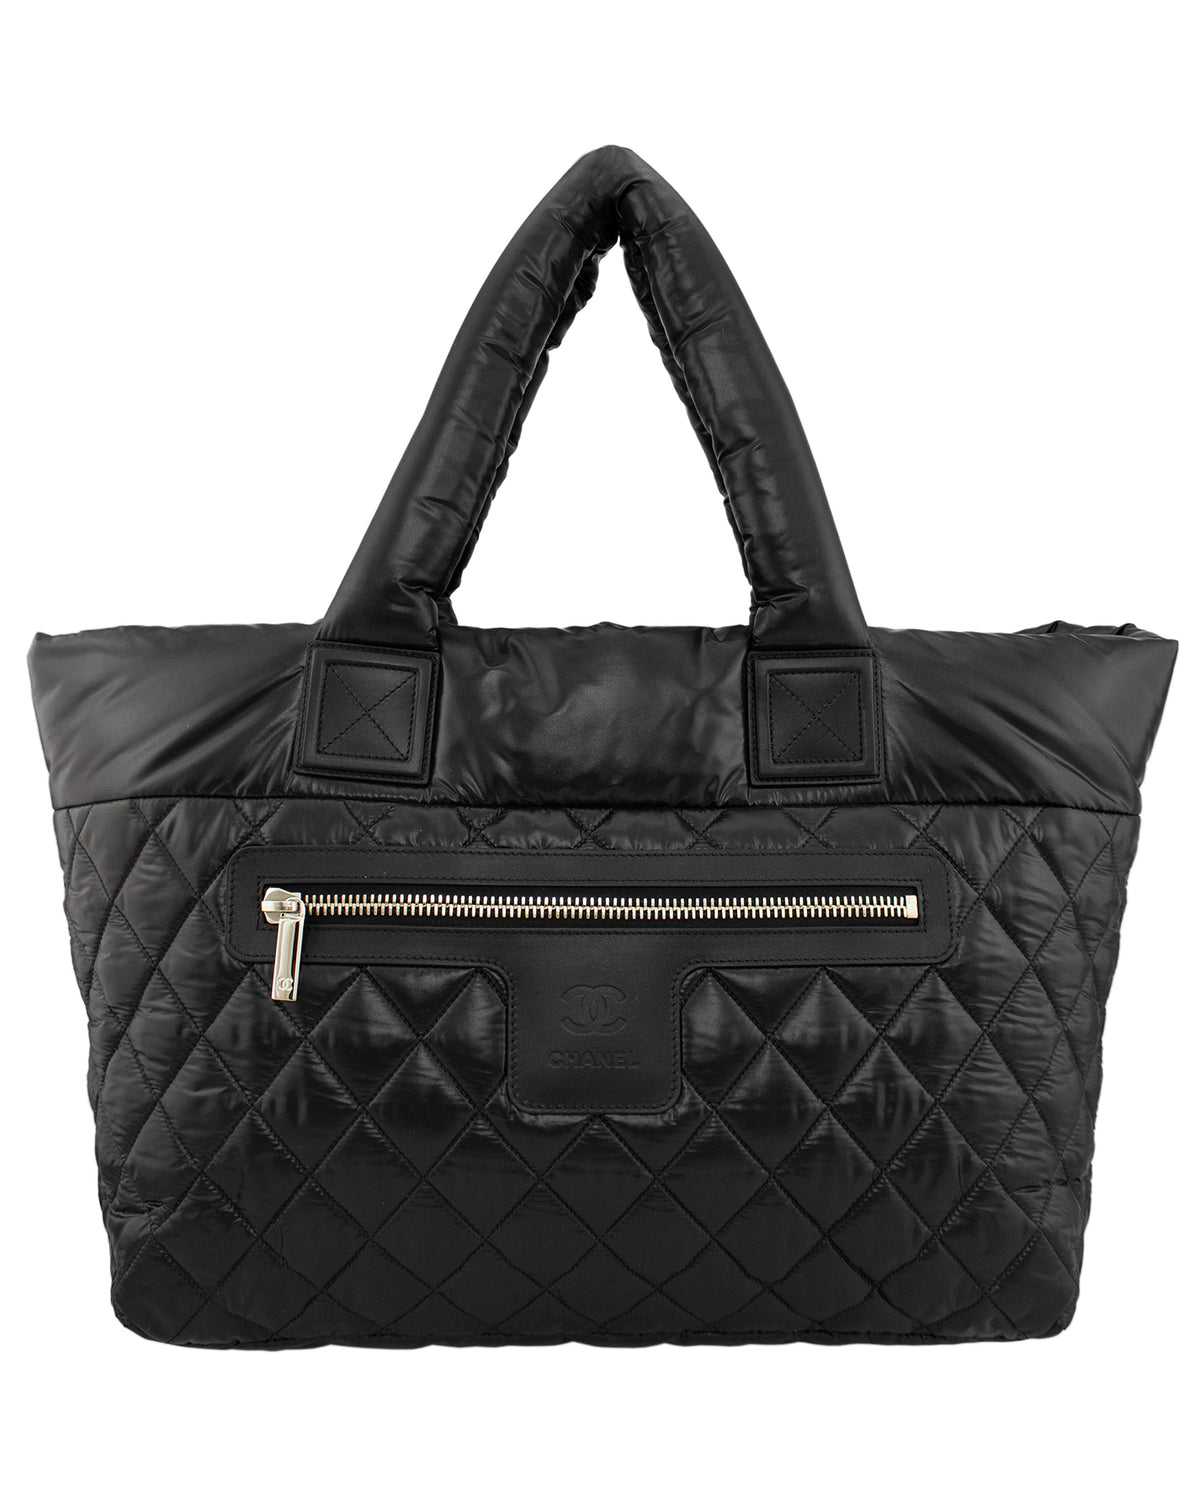 chanel quilted bag tote vintage